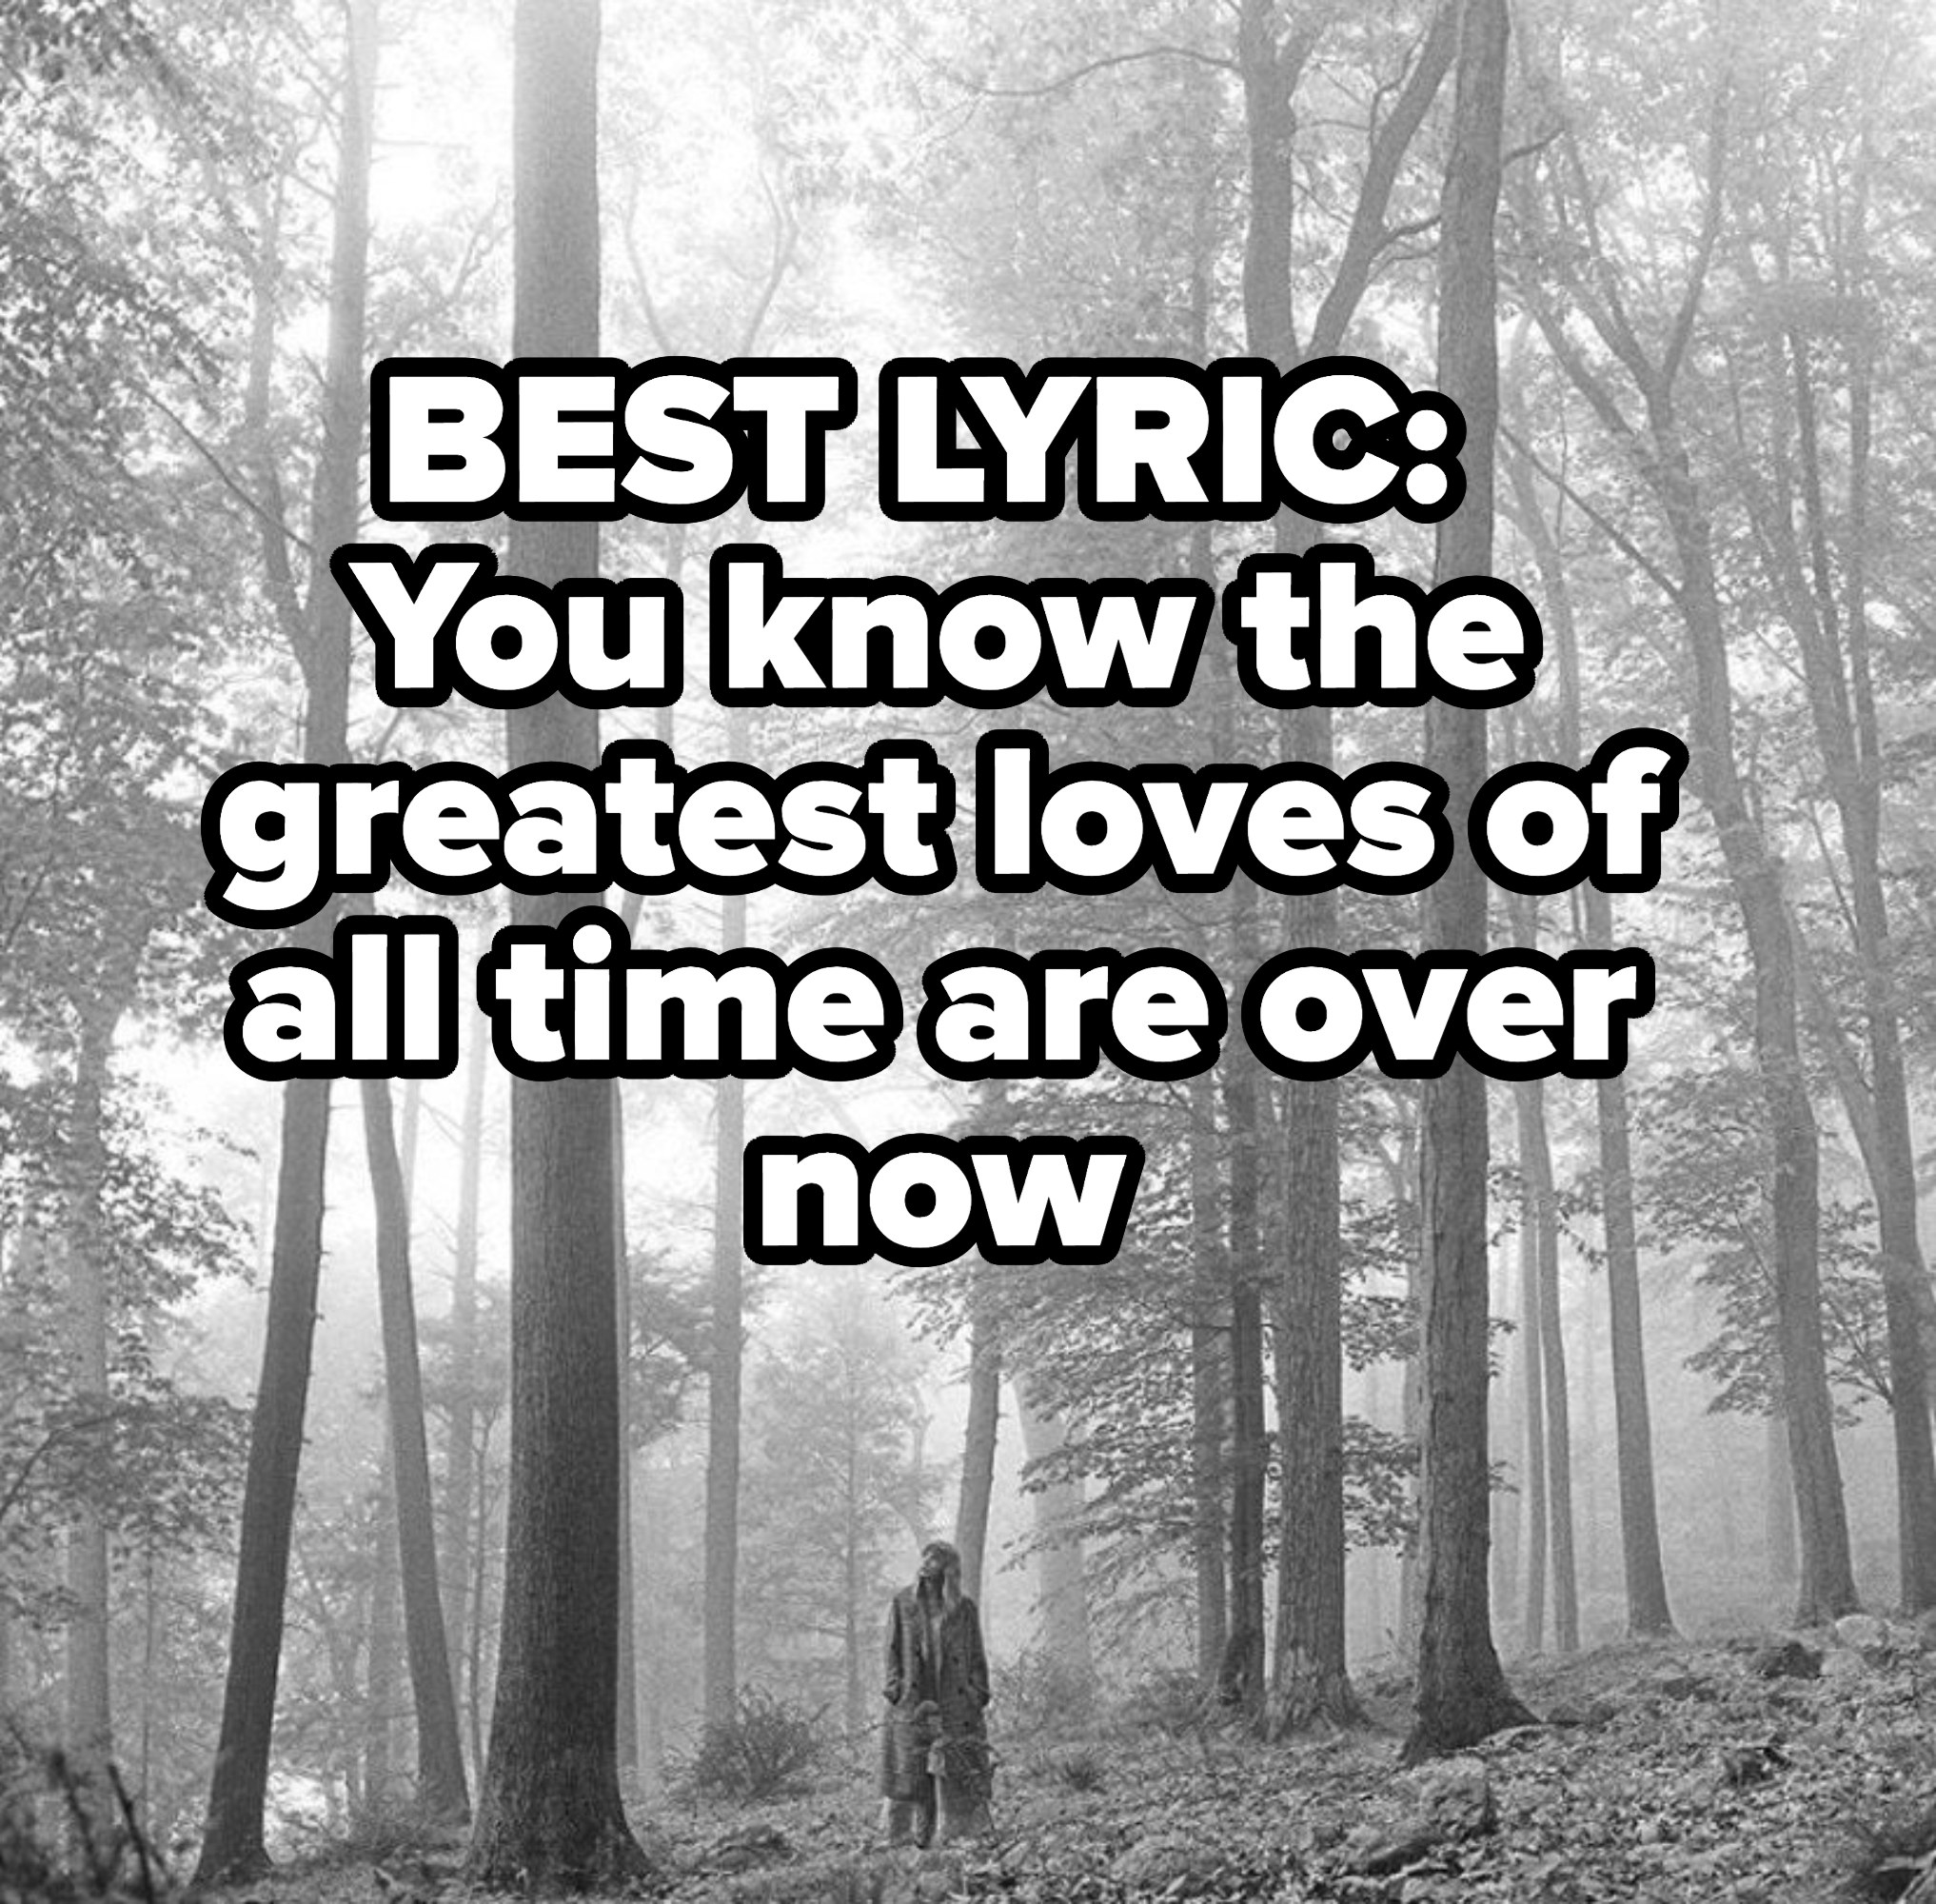 BEST LYRIC: 
You know the greatest loves of all time are over now